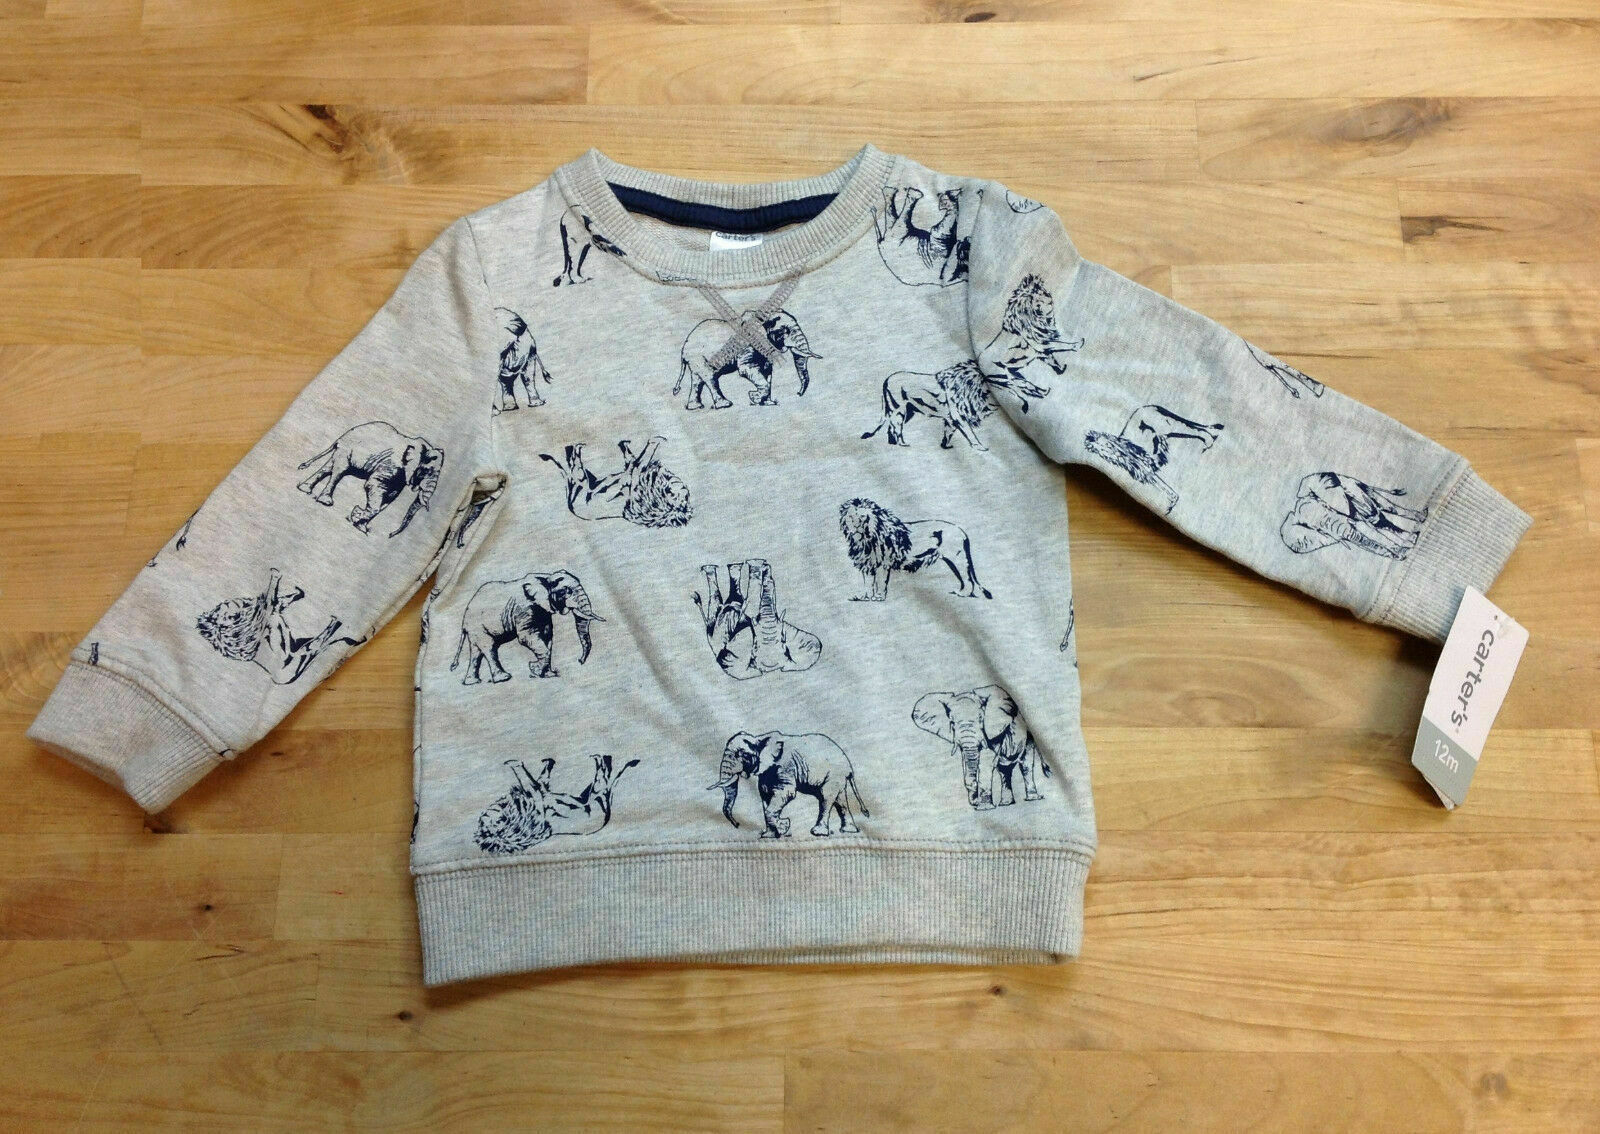 Carter's Baby Boys' Long-Sleeve Animal Shirt, Gray, Size 12 Months - $14.69